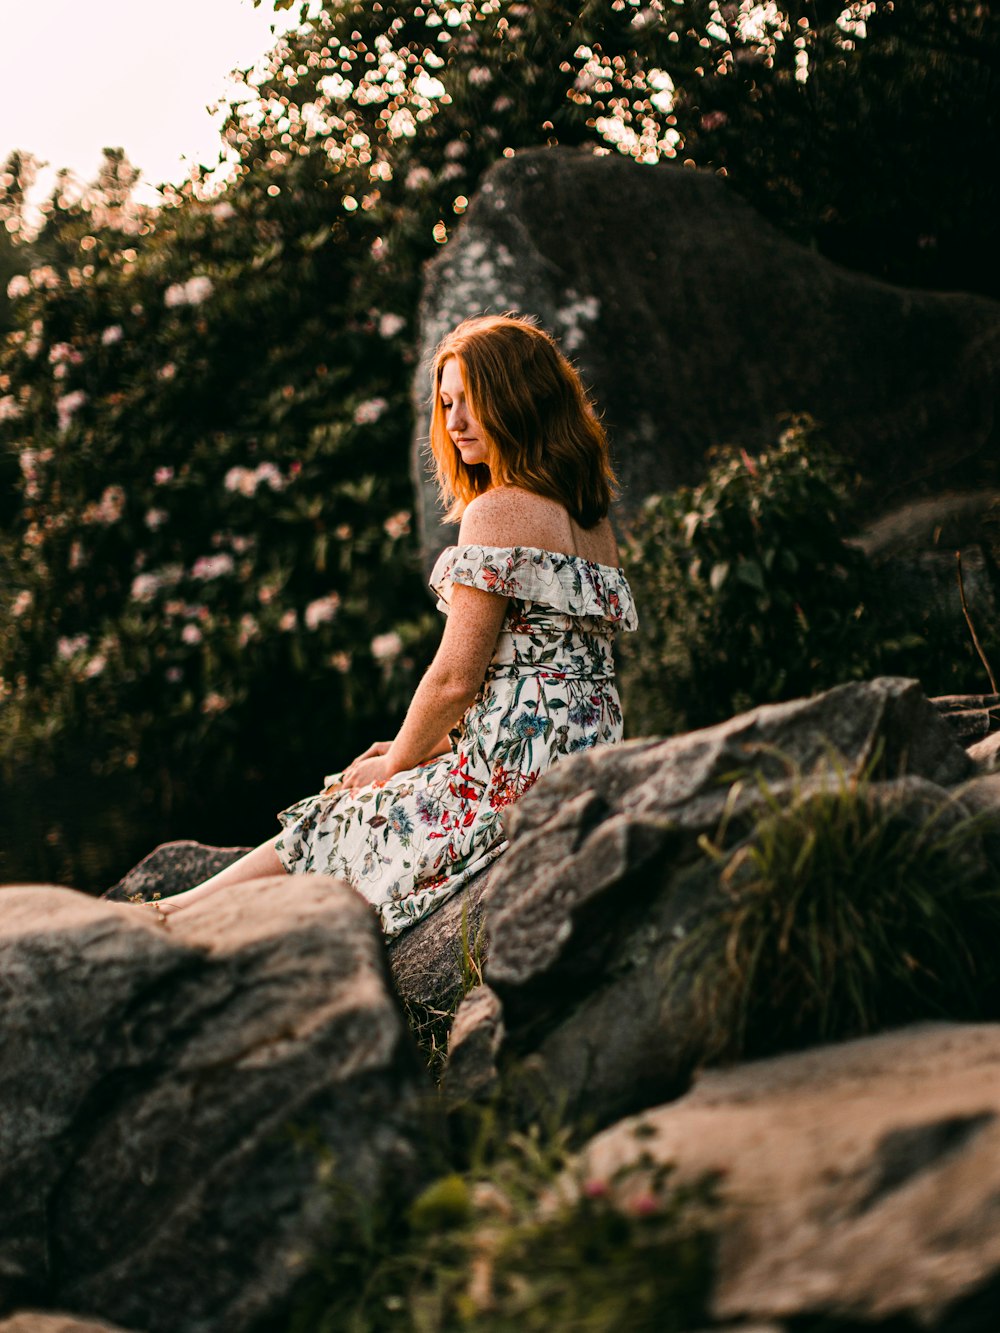 woman in white and blue floral dress sitting on rock during daytime